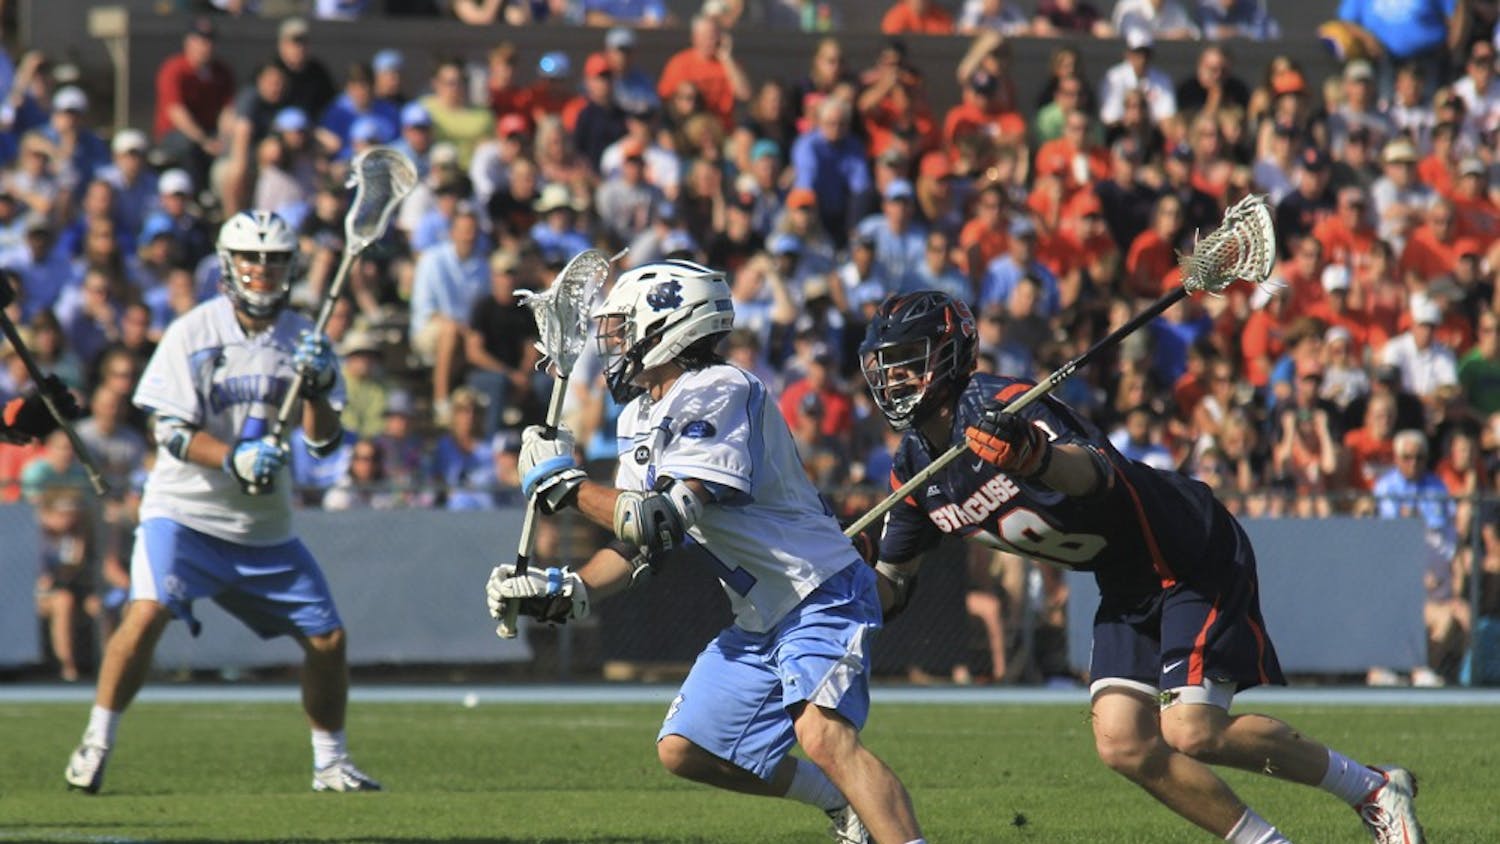 Senior Joey Sankey attempts a goal in the second half Saturday afternoon. Sankey became UNC's all-time leading scorer after UNC defeated Syracuse 17-15 at Fetzer field.